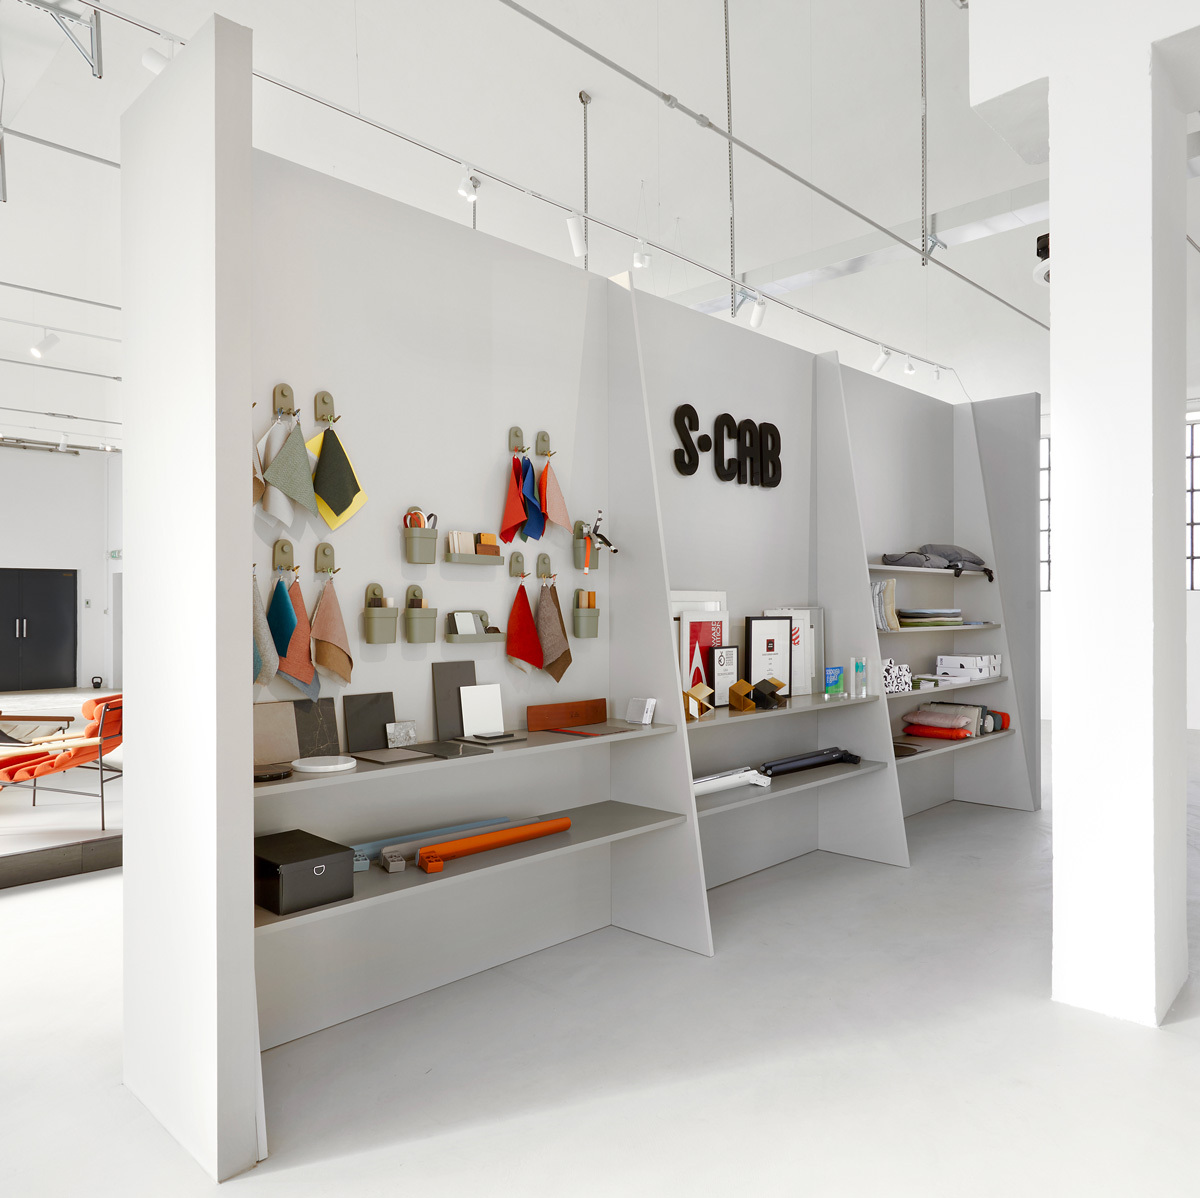 A new showroom as a contemporary vision of company’s identity